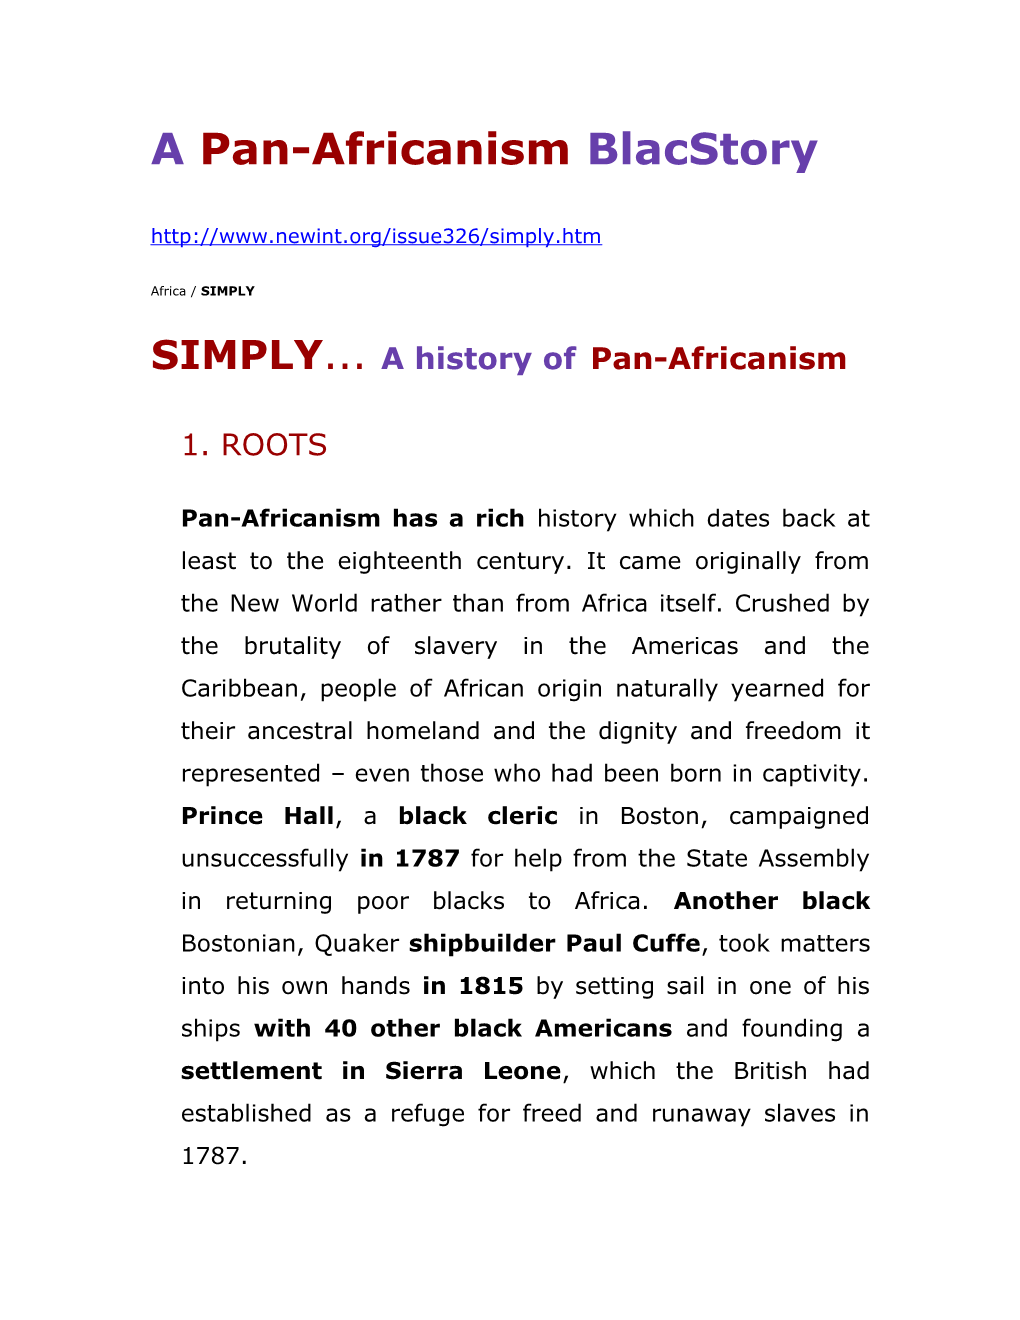 A Pan-Africanism History